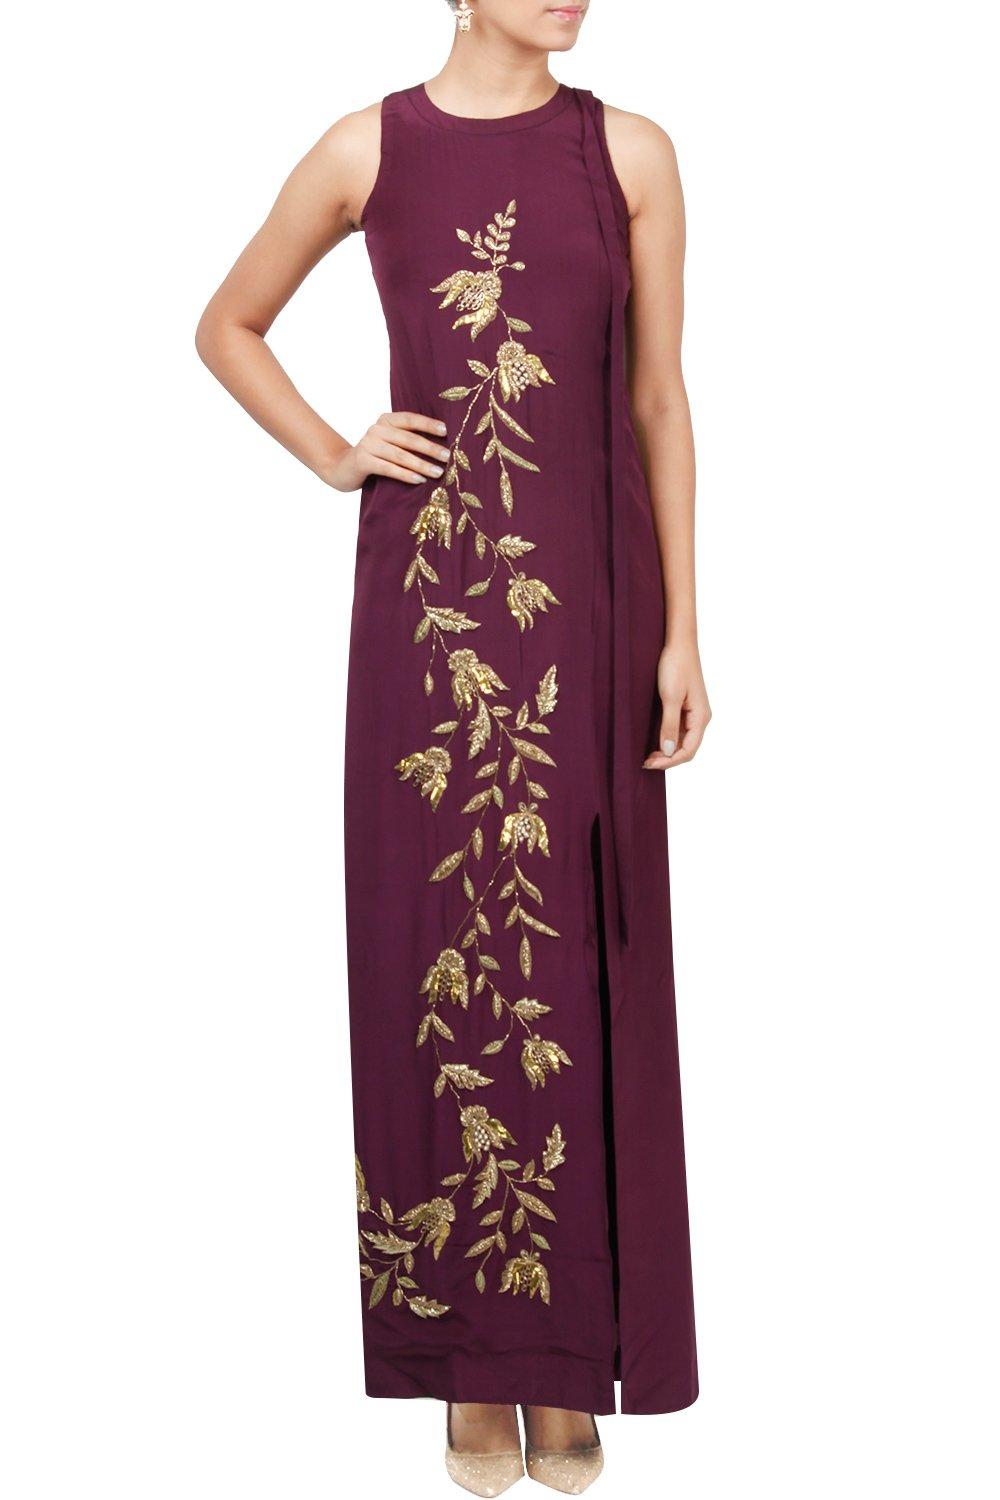 Image result for AUBERGINE EMBROIDERED GOWN